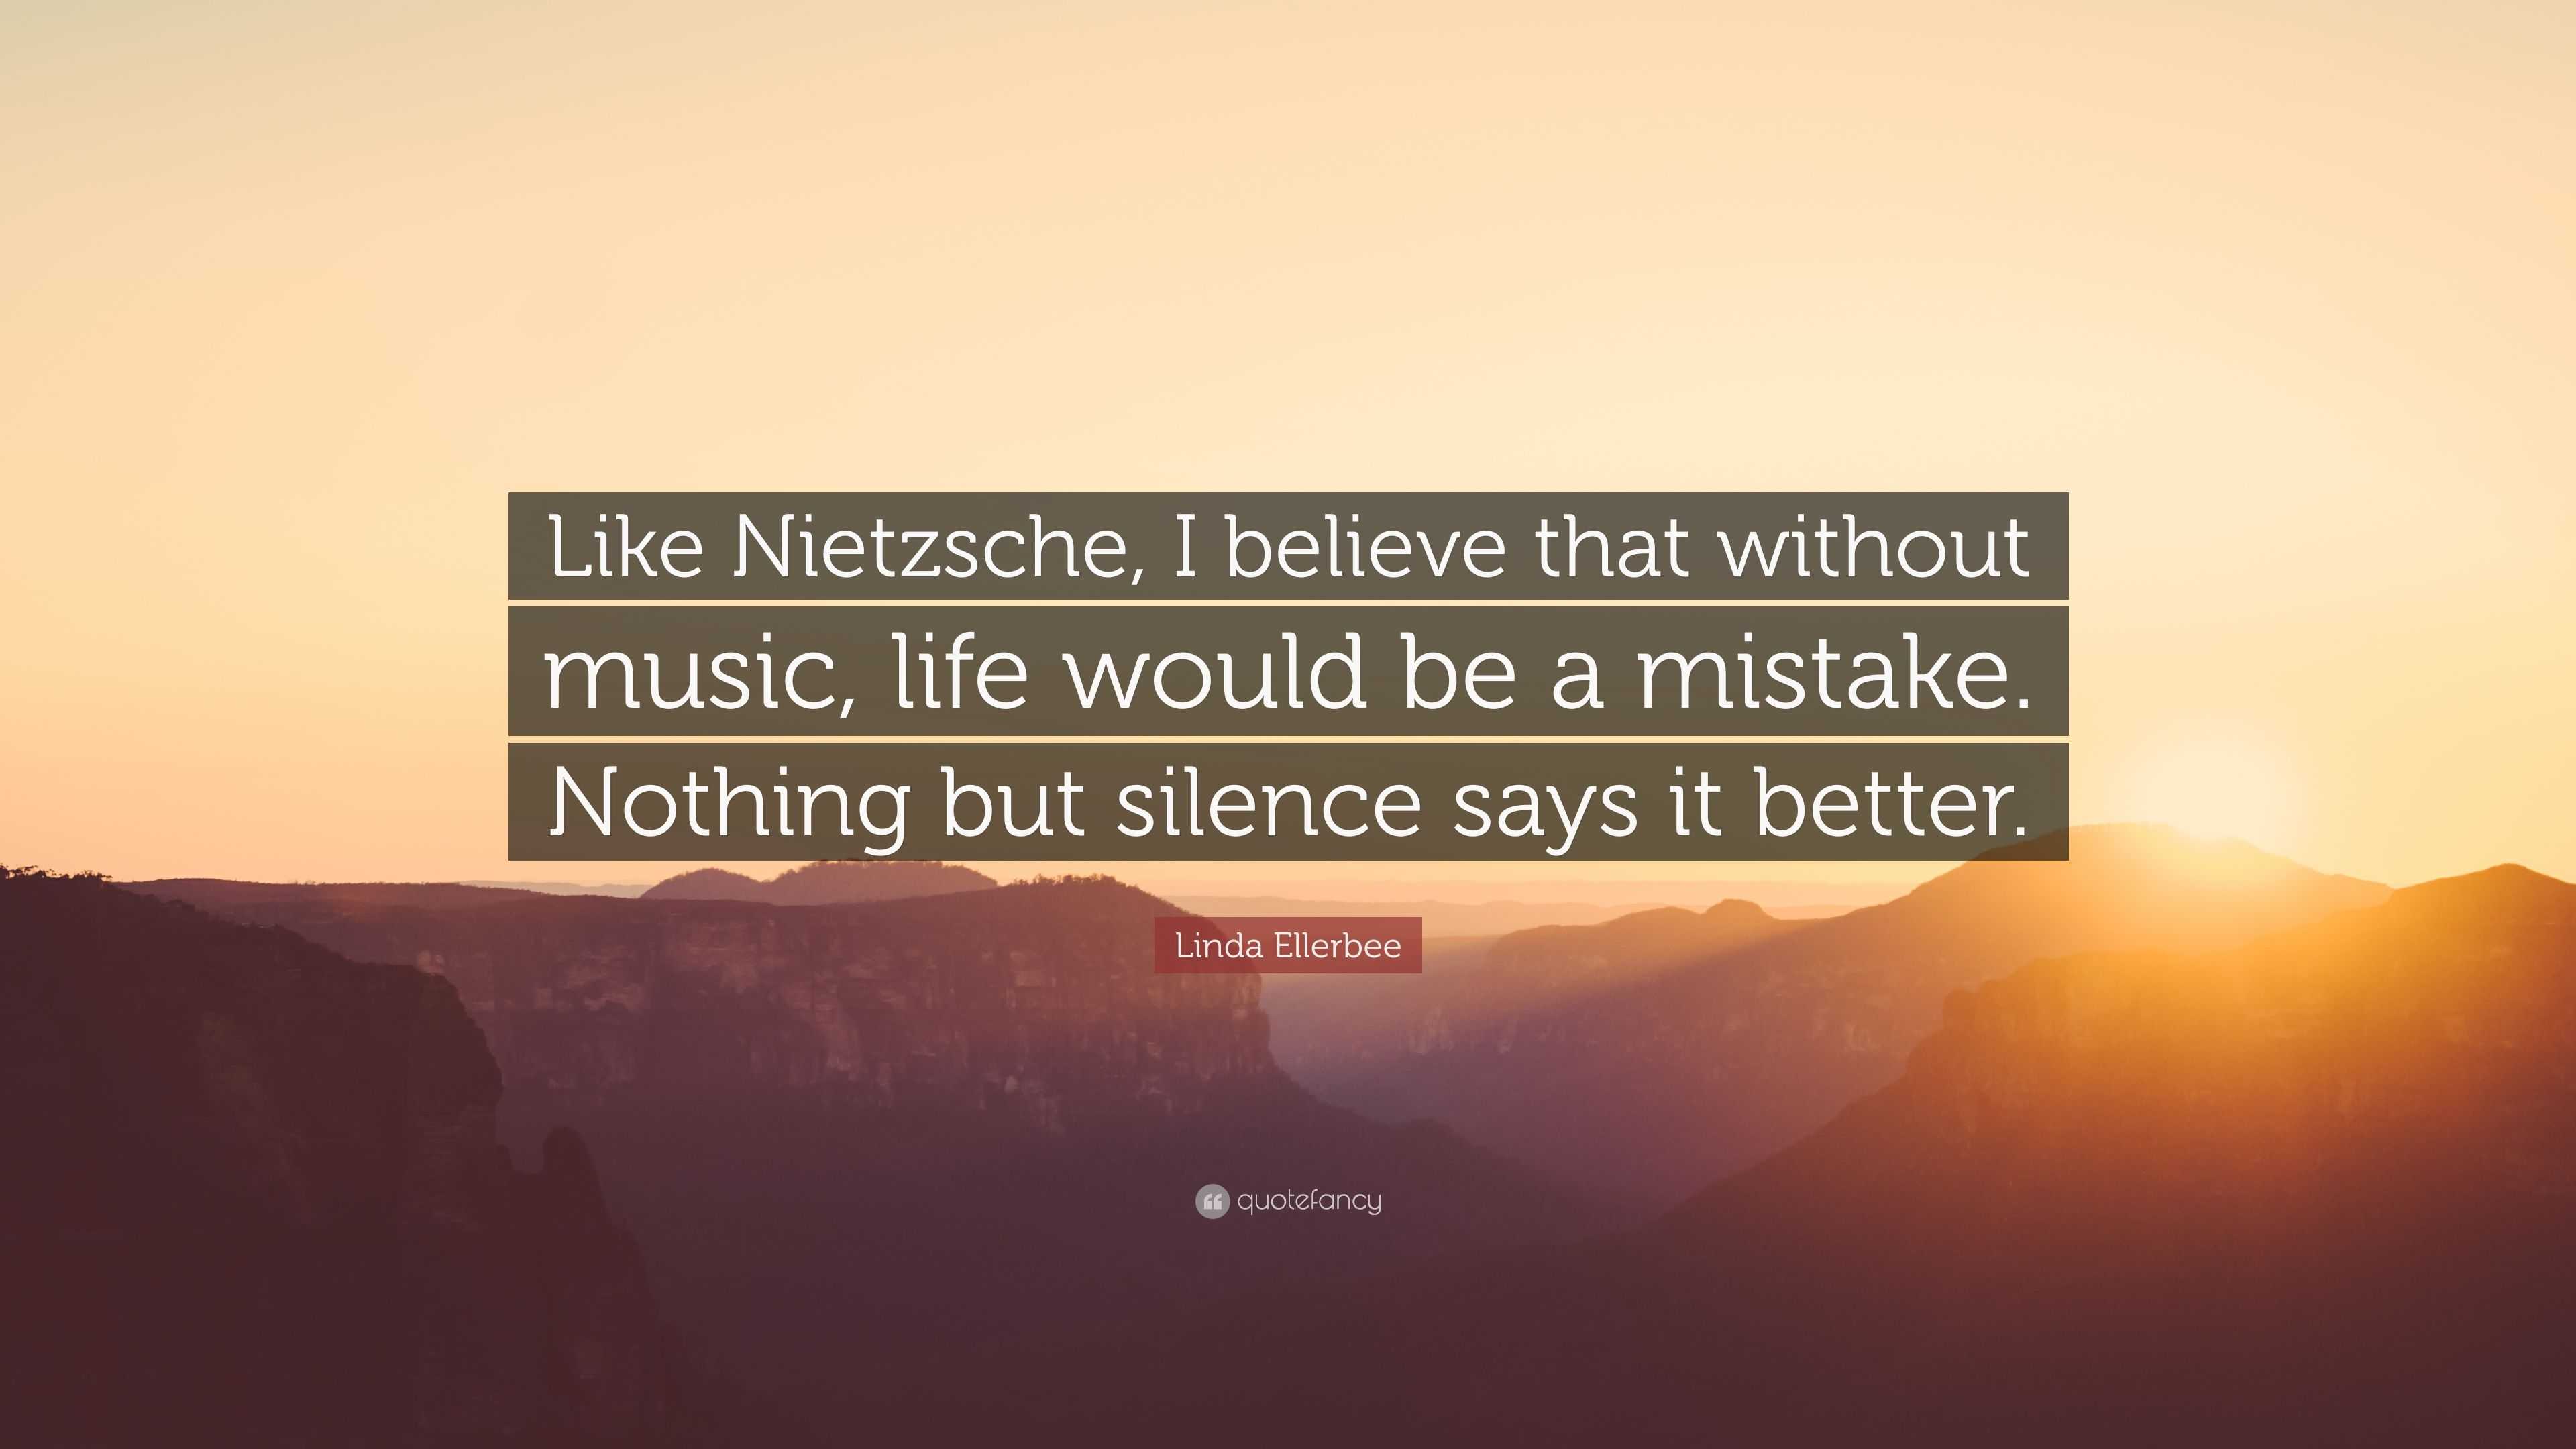 Linda Ellerbee Quote “Like Nietzsche I believe that without music life would